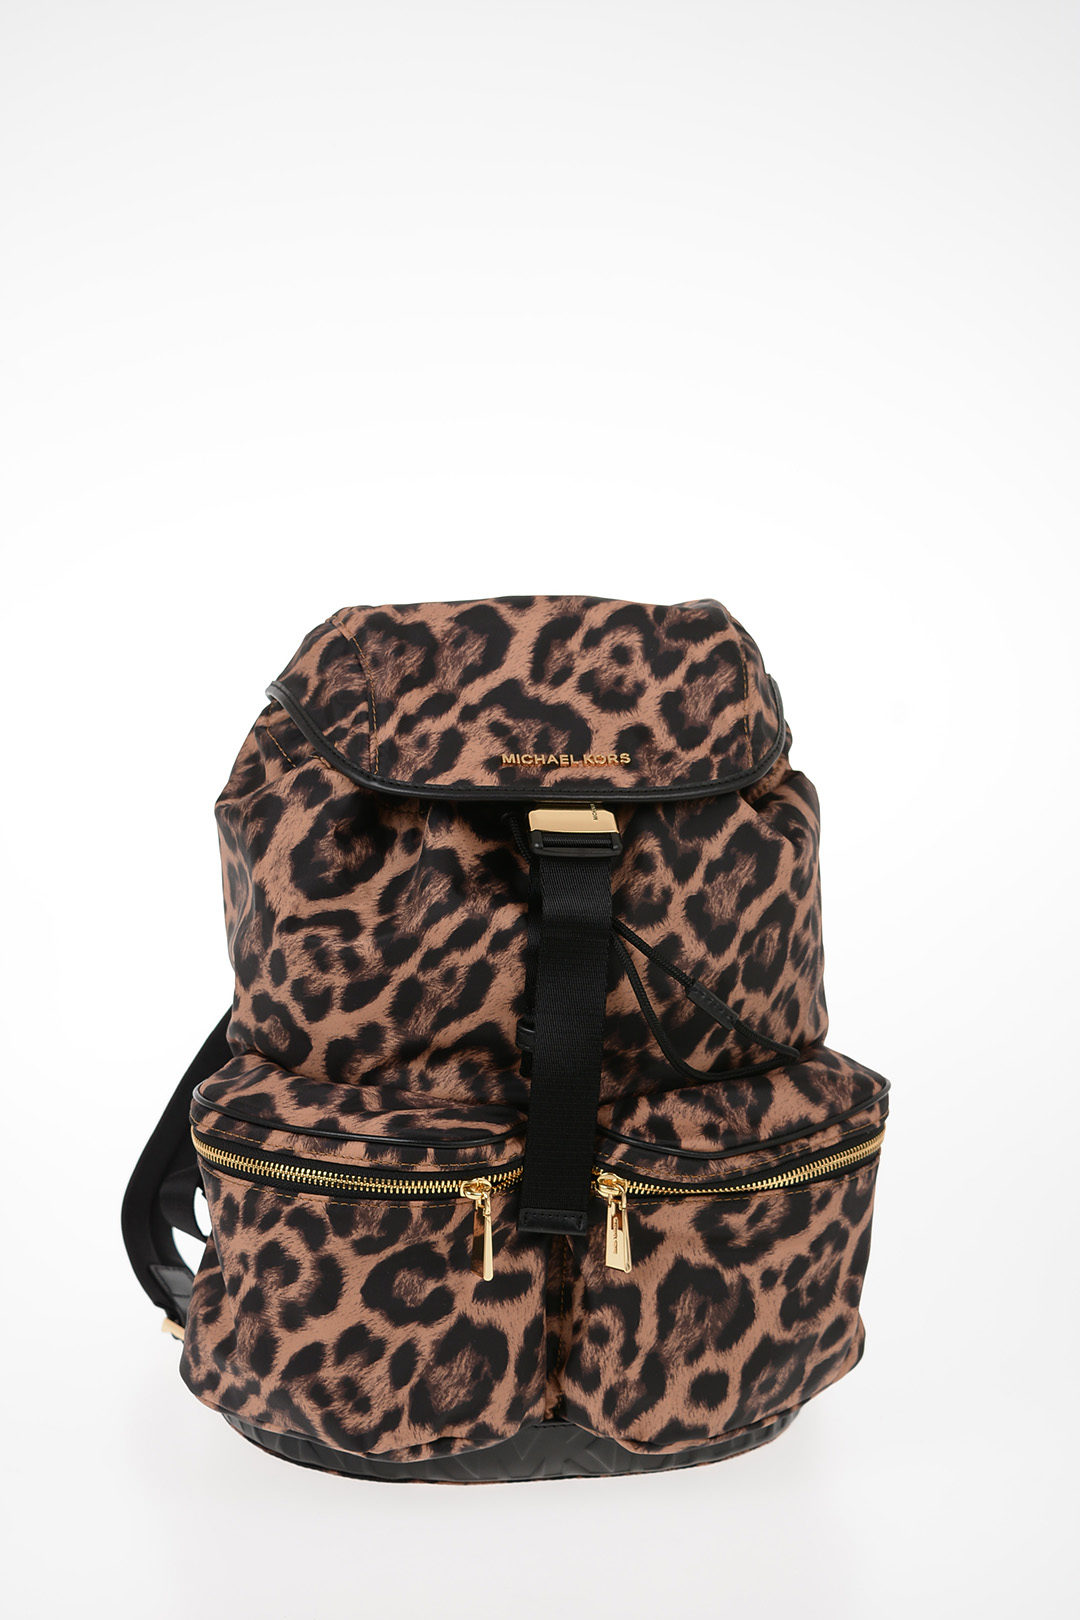 Michael Kors Animal Printed Fabric Multi-pocket PERRY Backpack women -  Glamood Outlet